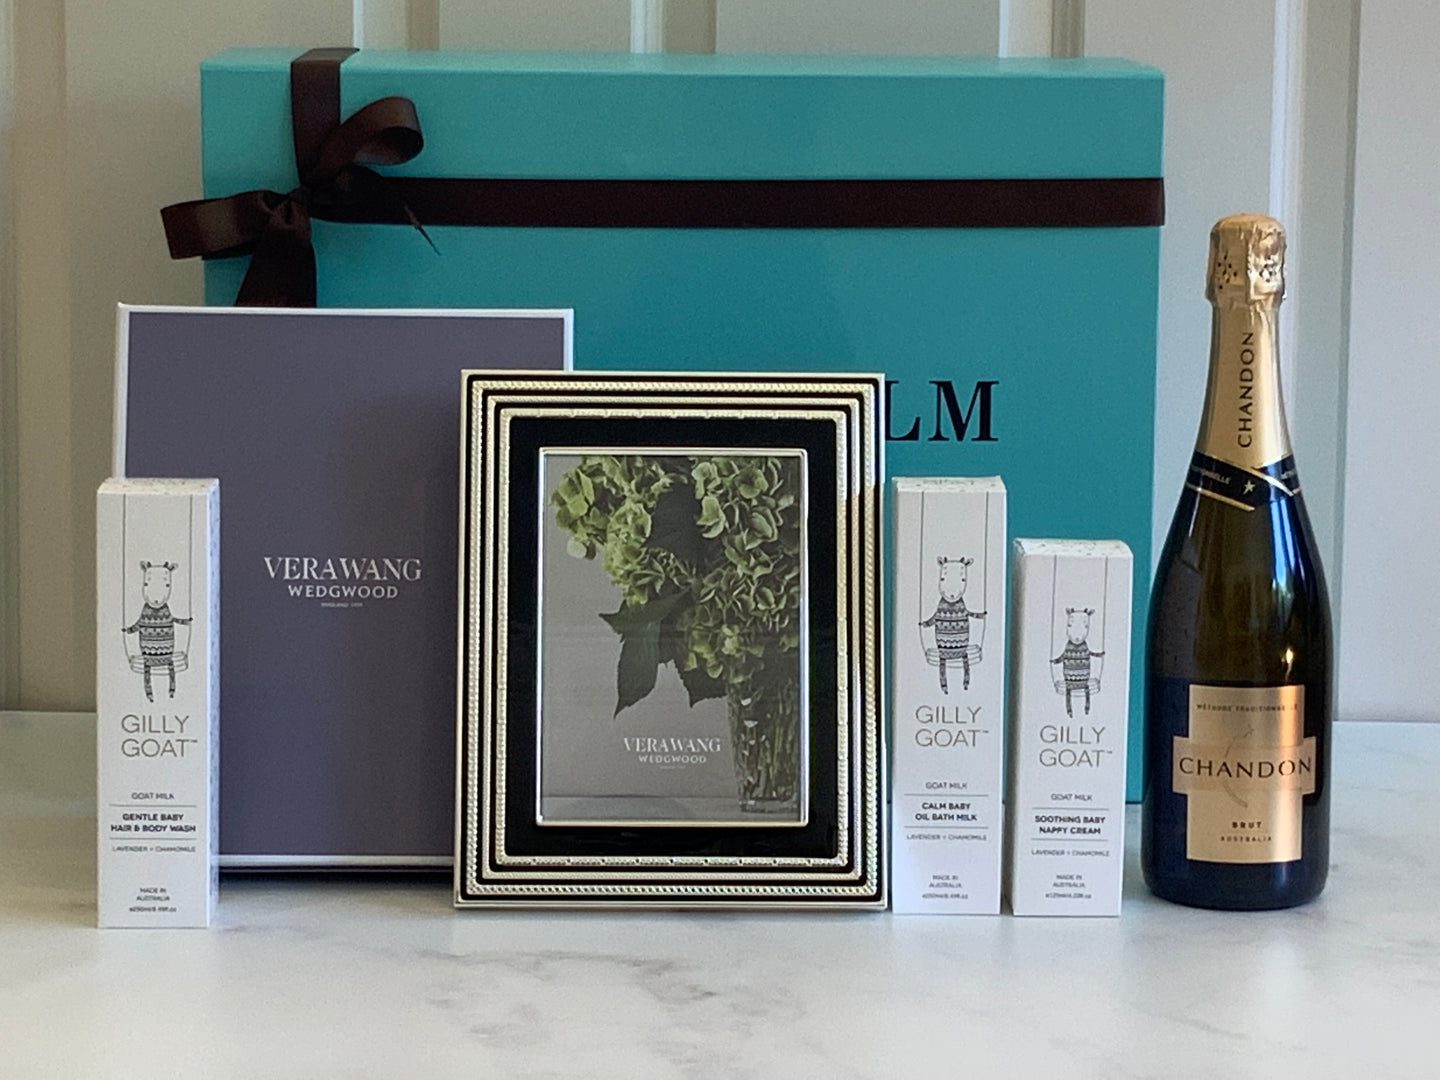 Chandon Australian Sparkling, Wedgwood Vera Wang Frame, Gilly Goat Luxury Baby Products